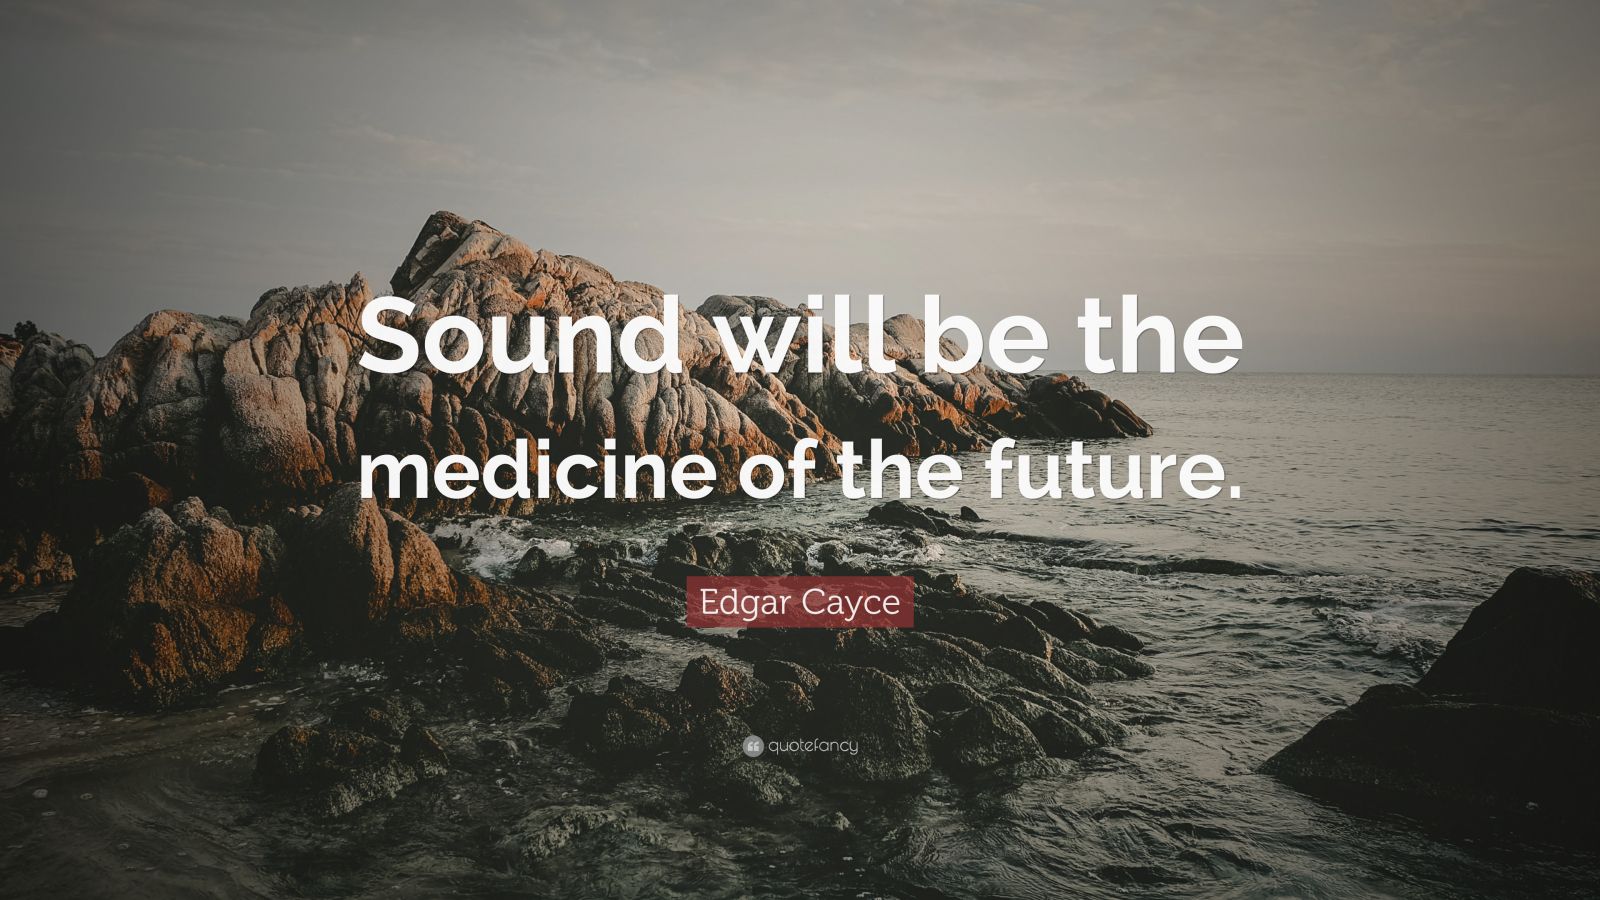 2497110 Edgar Cayce Quote Sound will be the medicine of the future